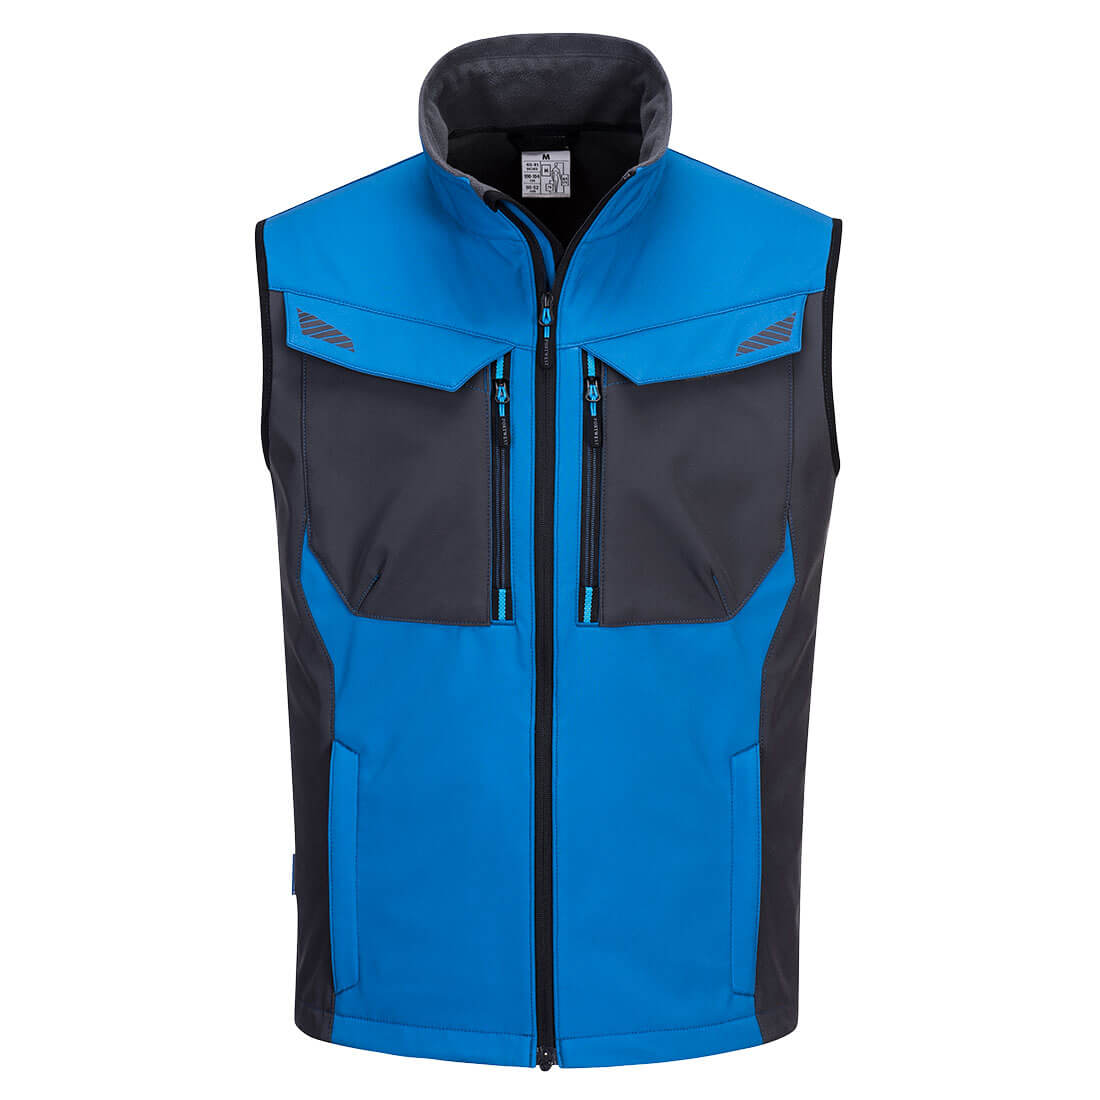 Luxury Breathable Windproof Waterproof Softshell Gilet with Reflective Trims 